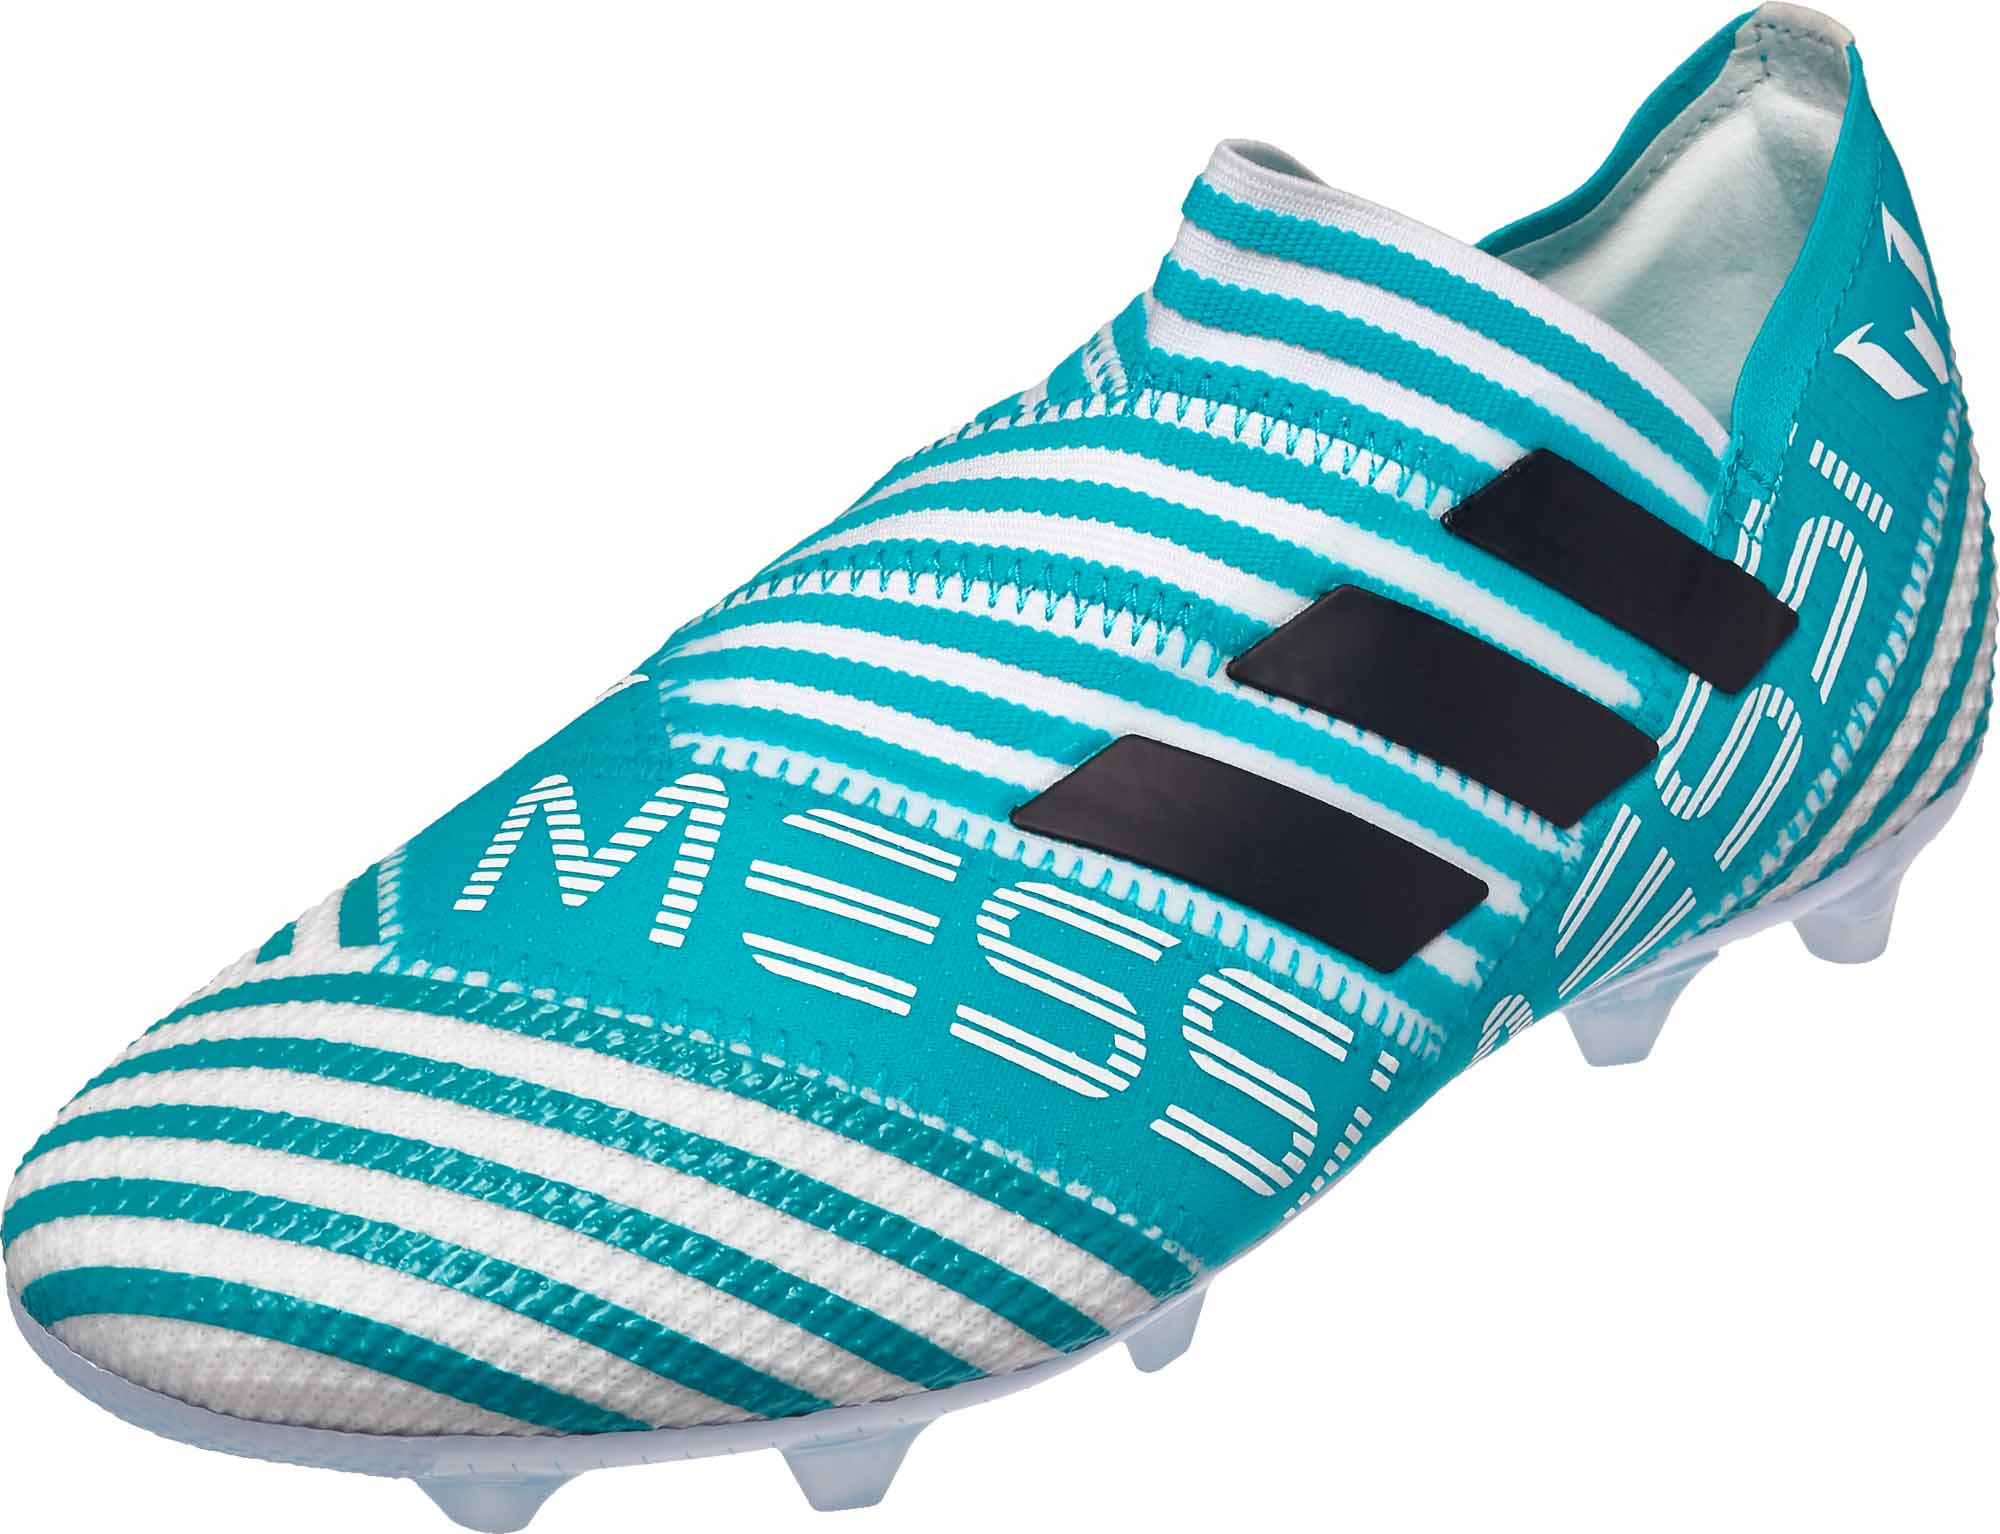 messi youth soccer shoes